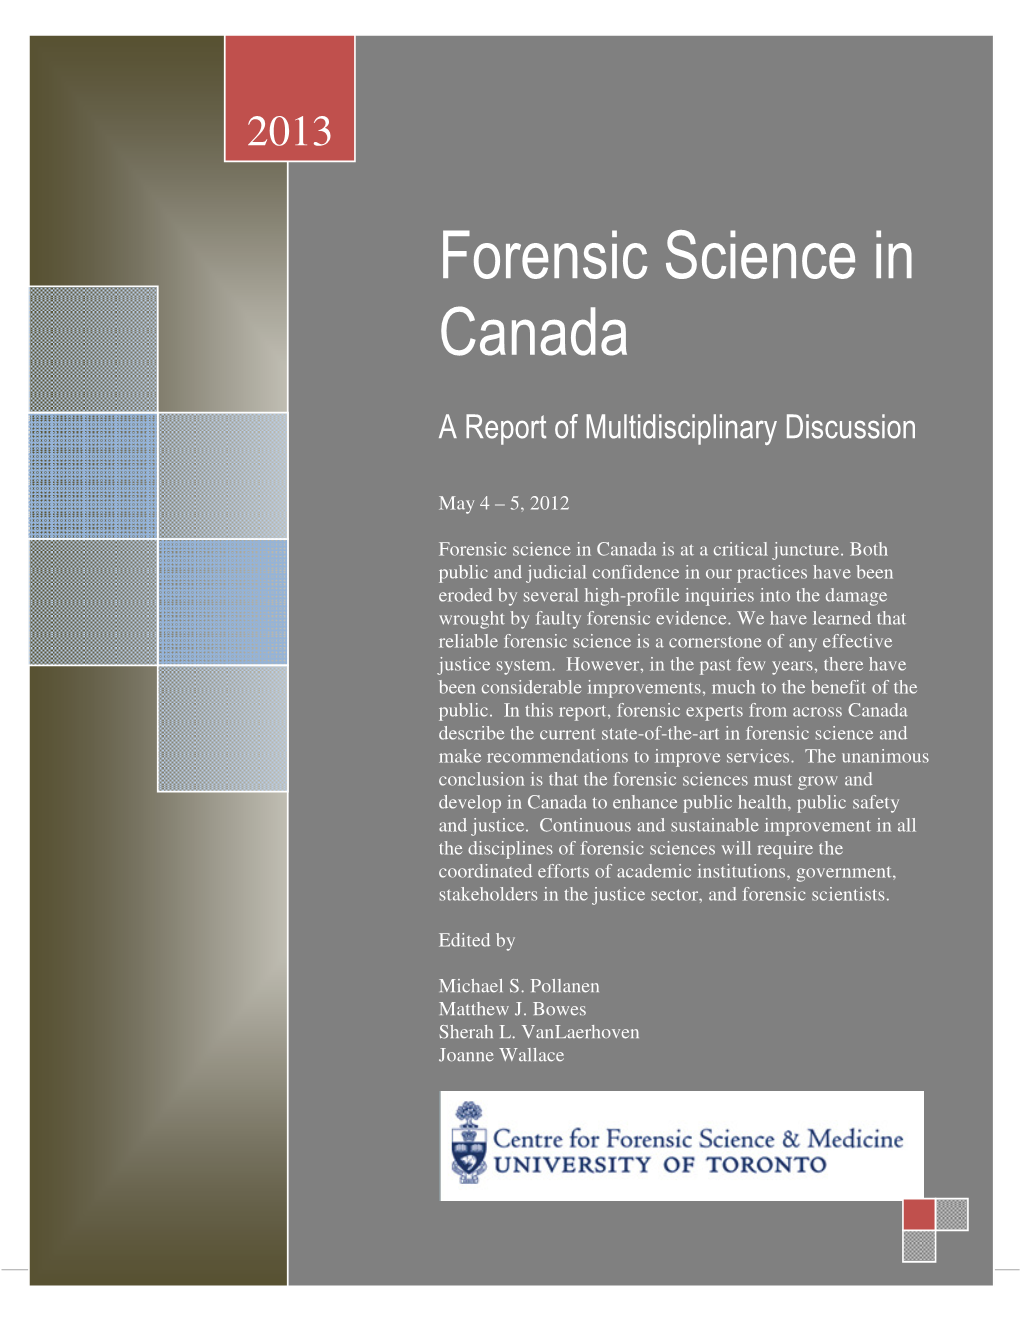 Forensic Science in Canada